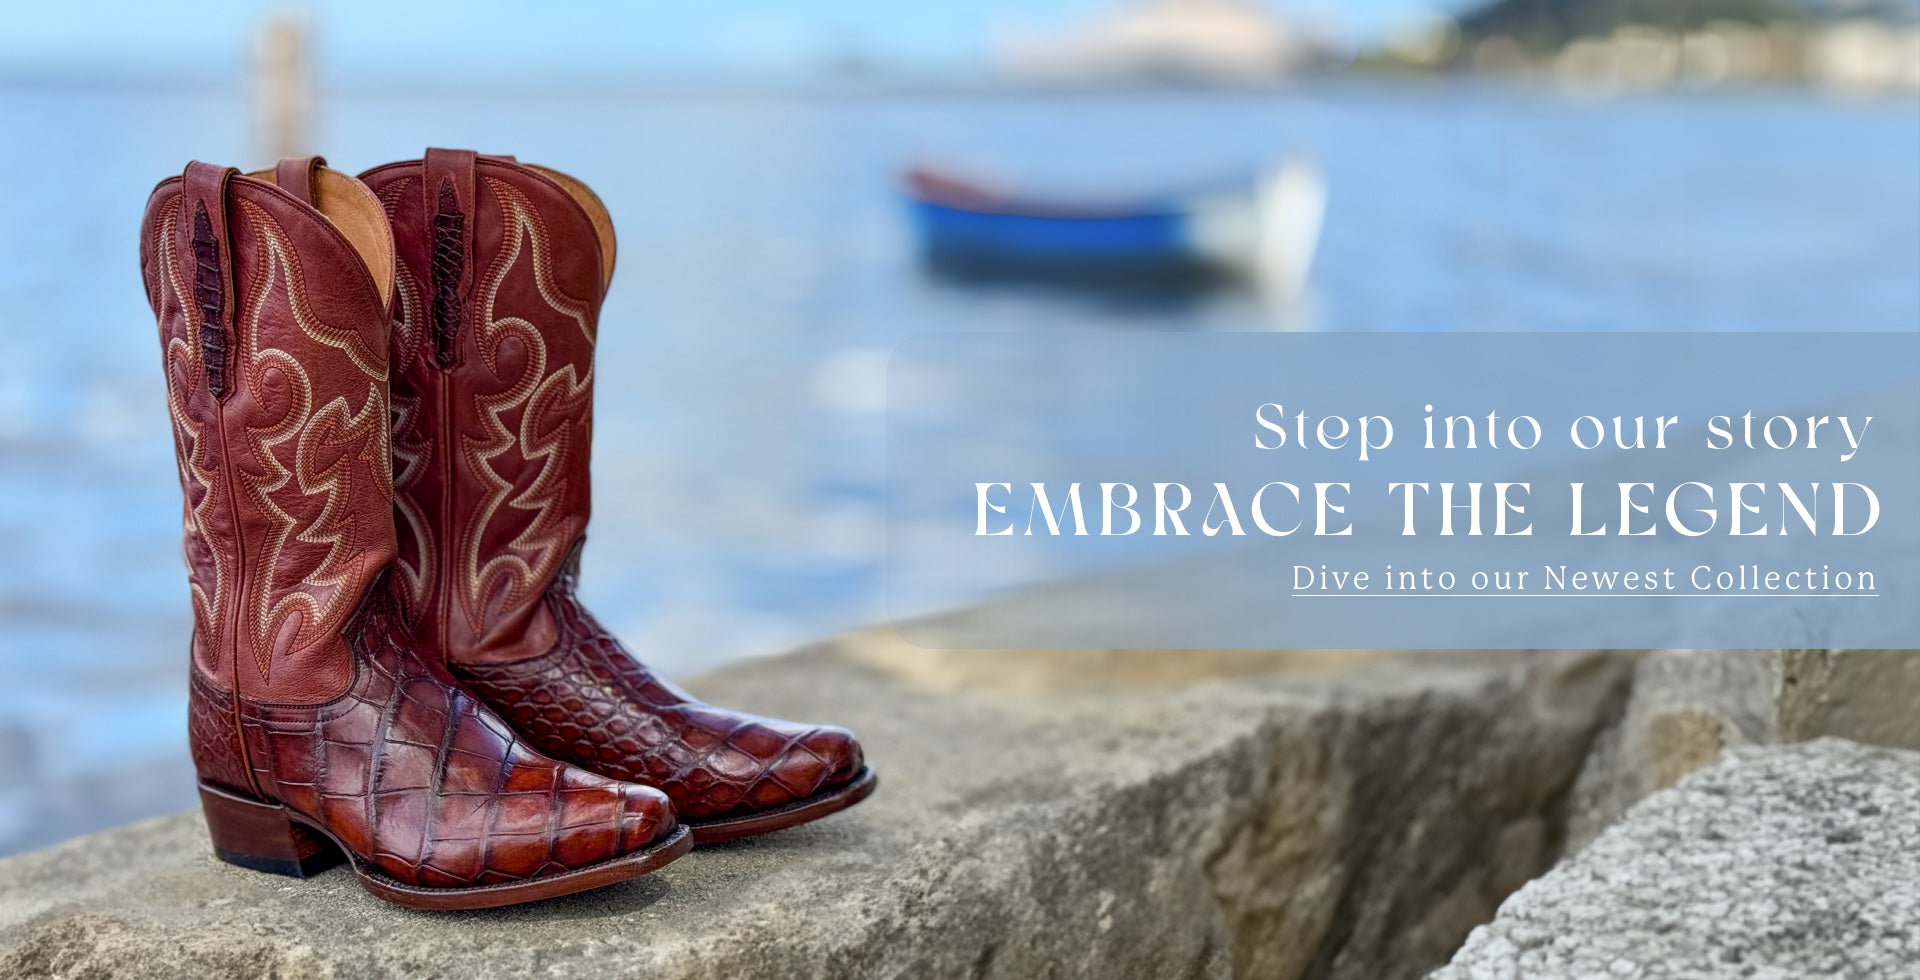 Skip's Handcrafted boots by the water